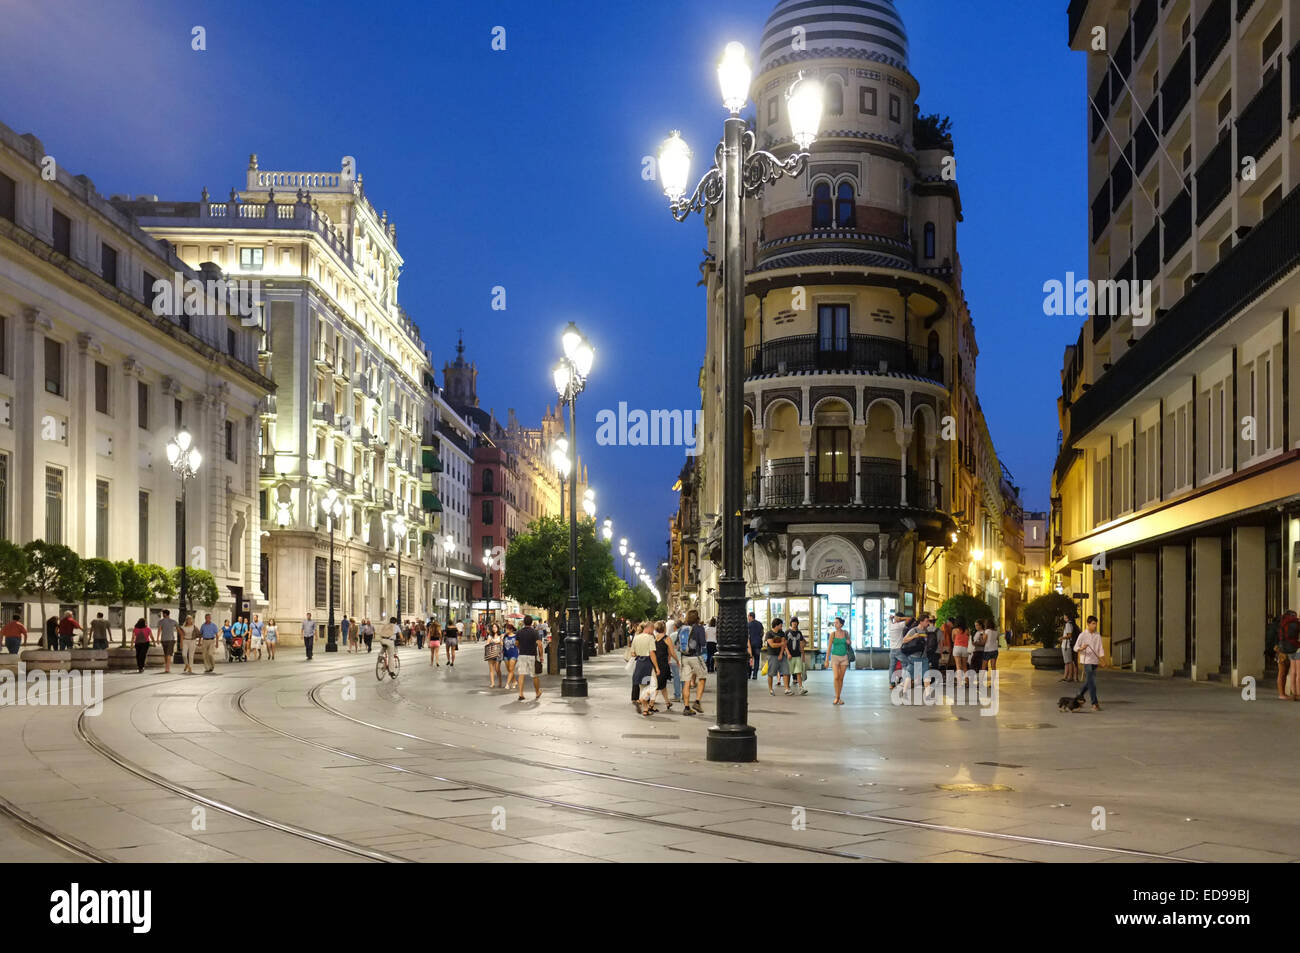 Seville Spain: People out on the street at night in Sevilla Stock Photo